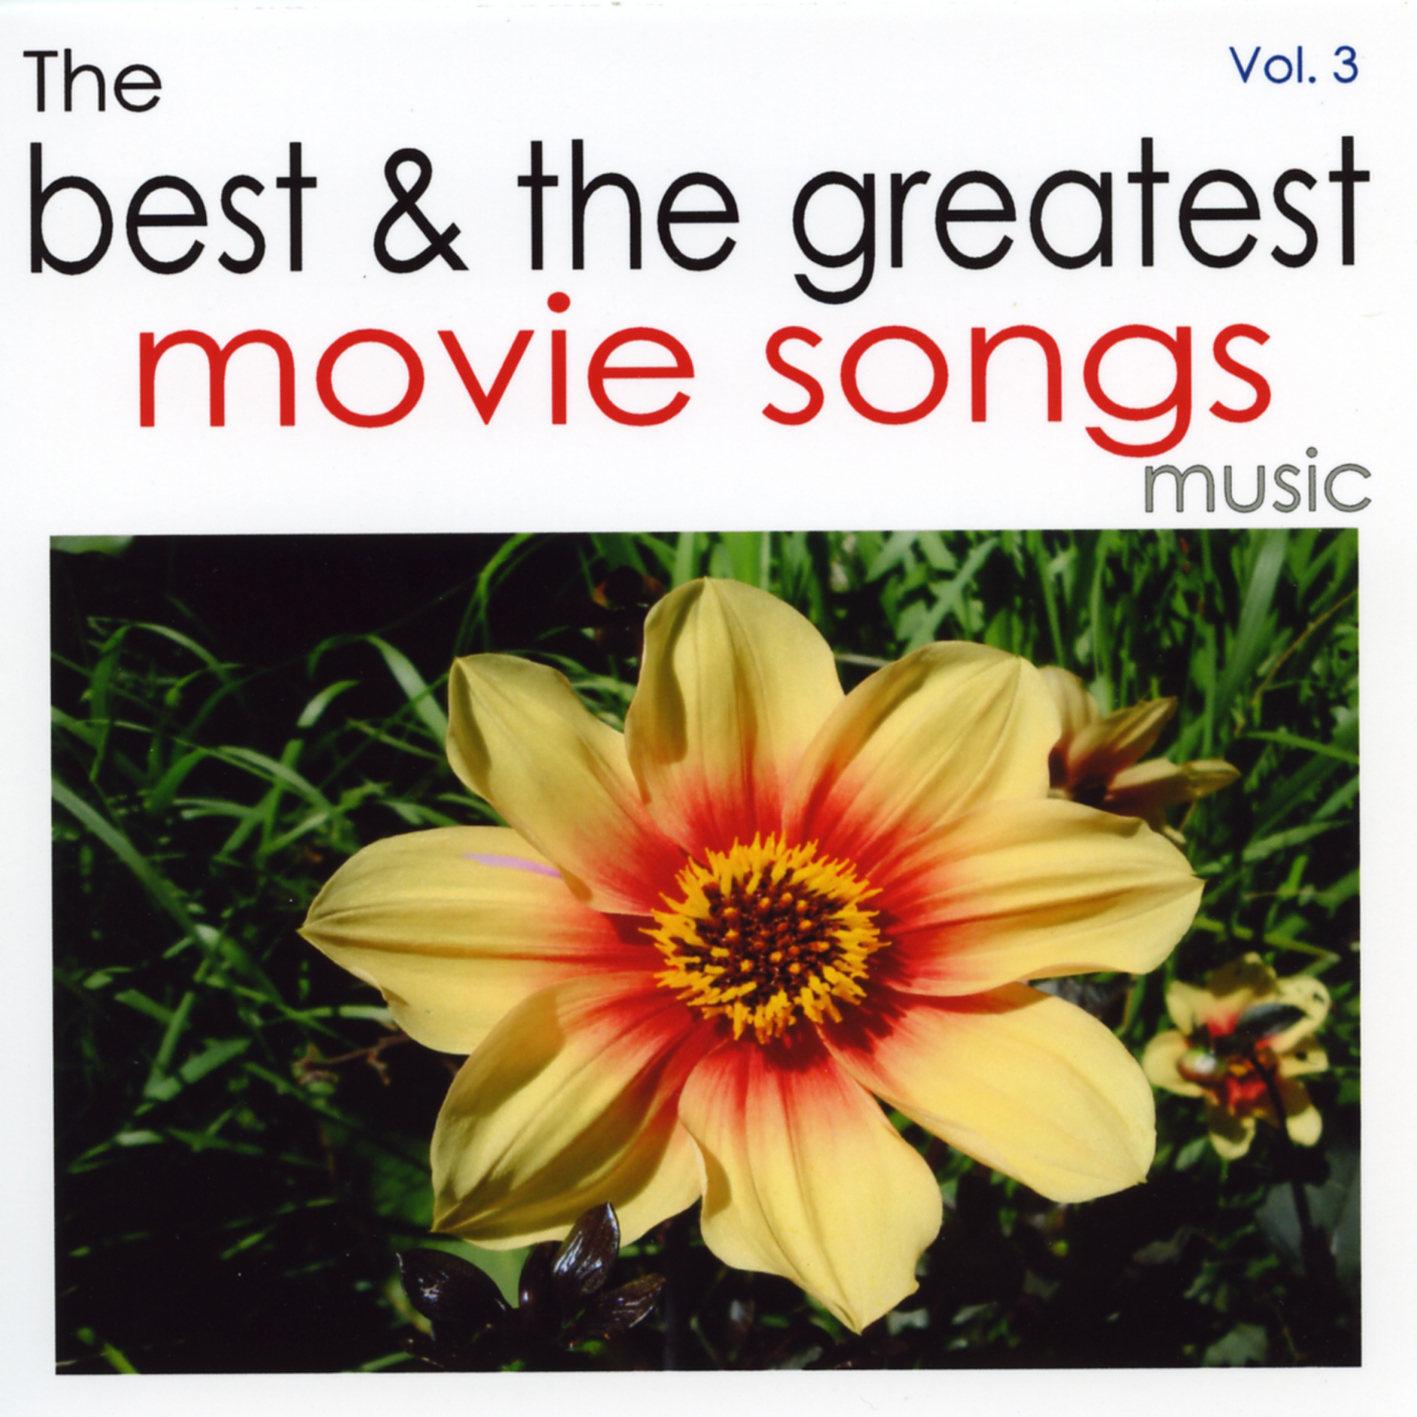 The Best & The Greatest Movie Songs Vol.3